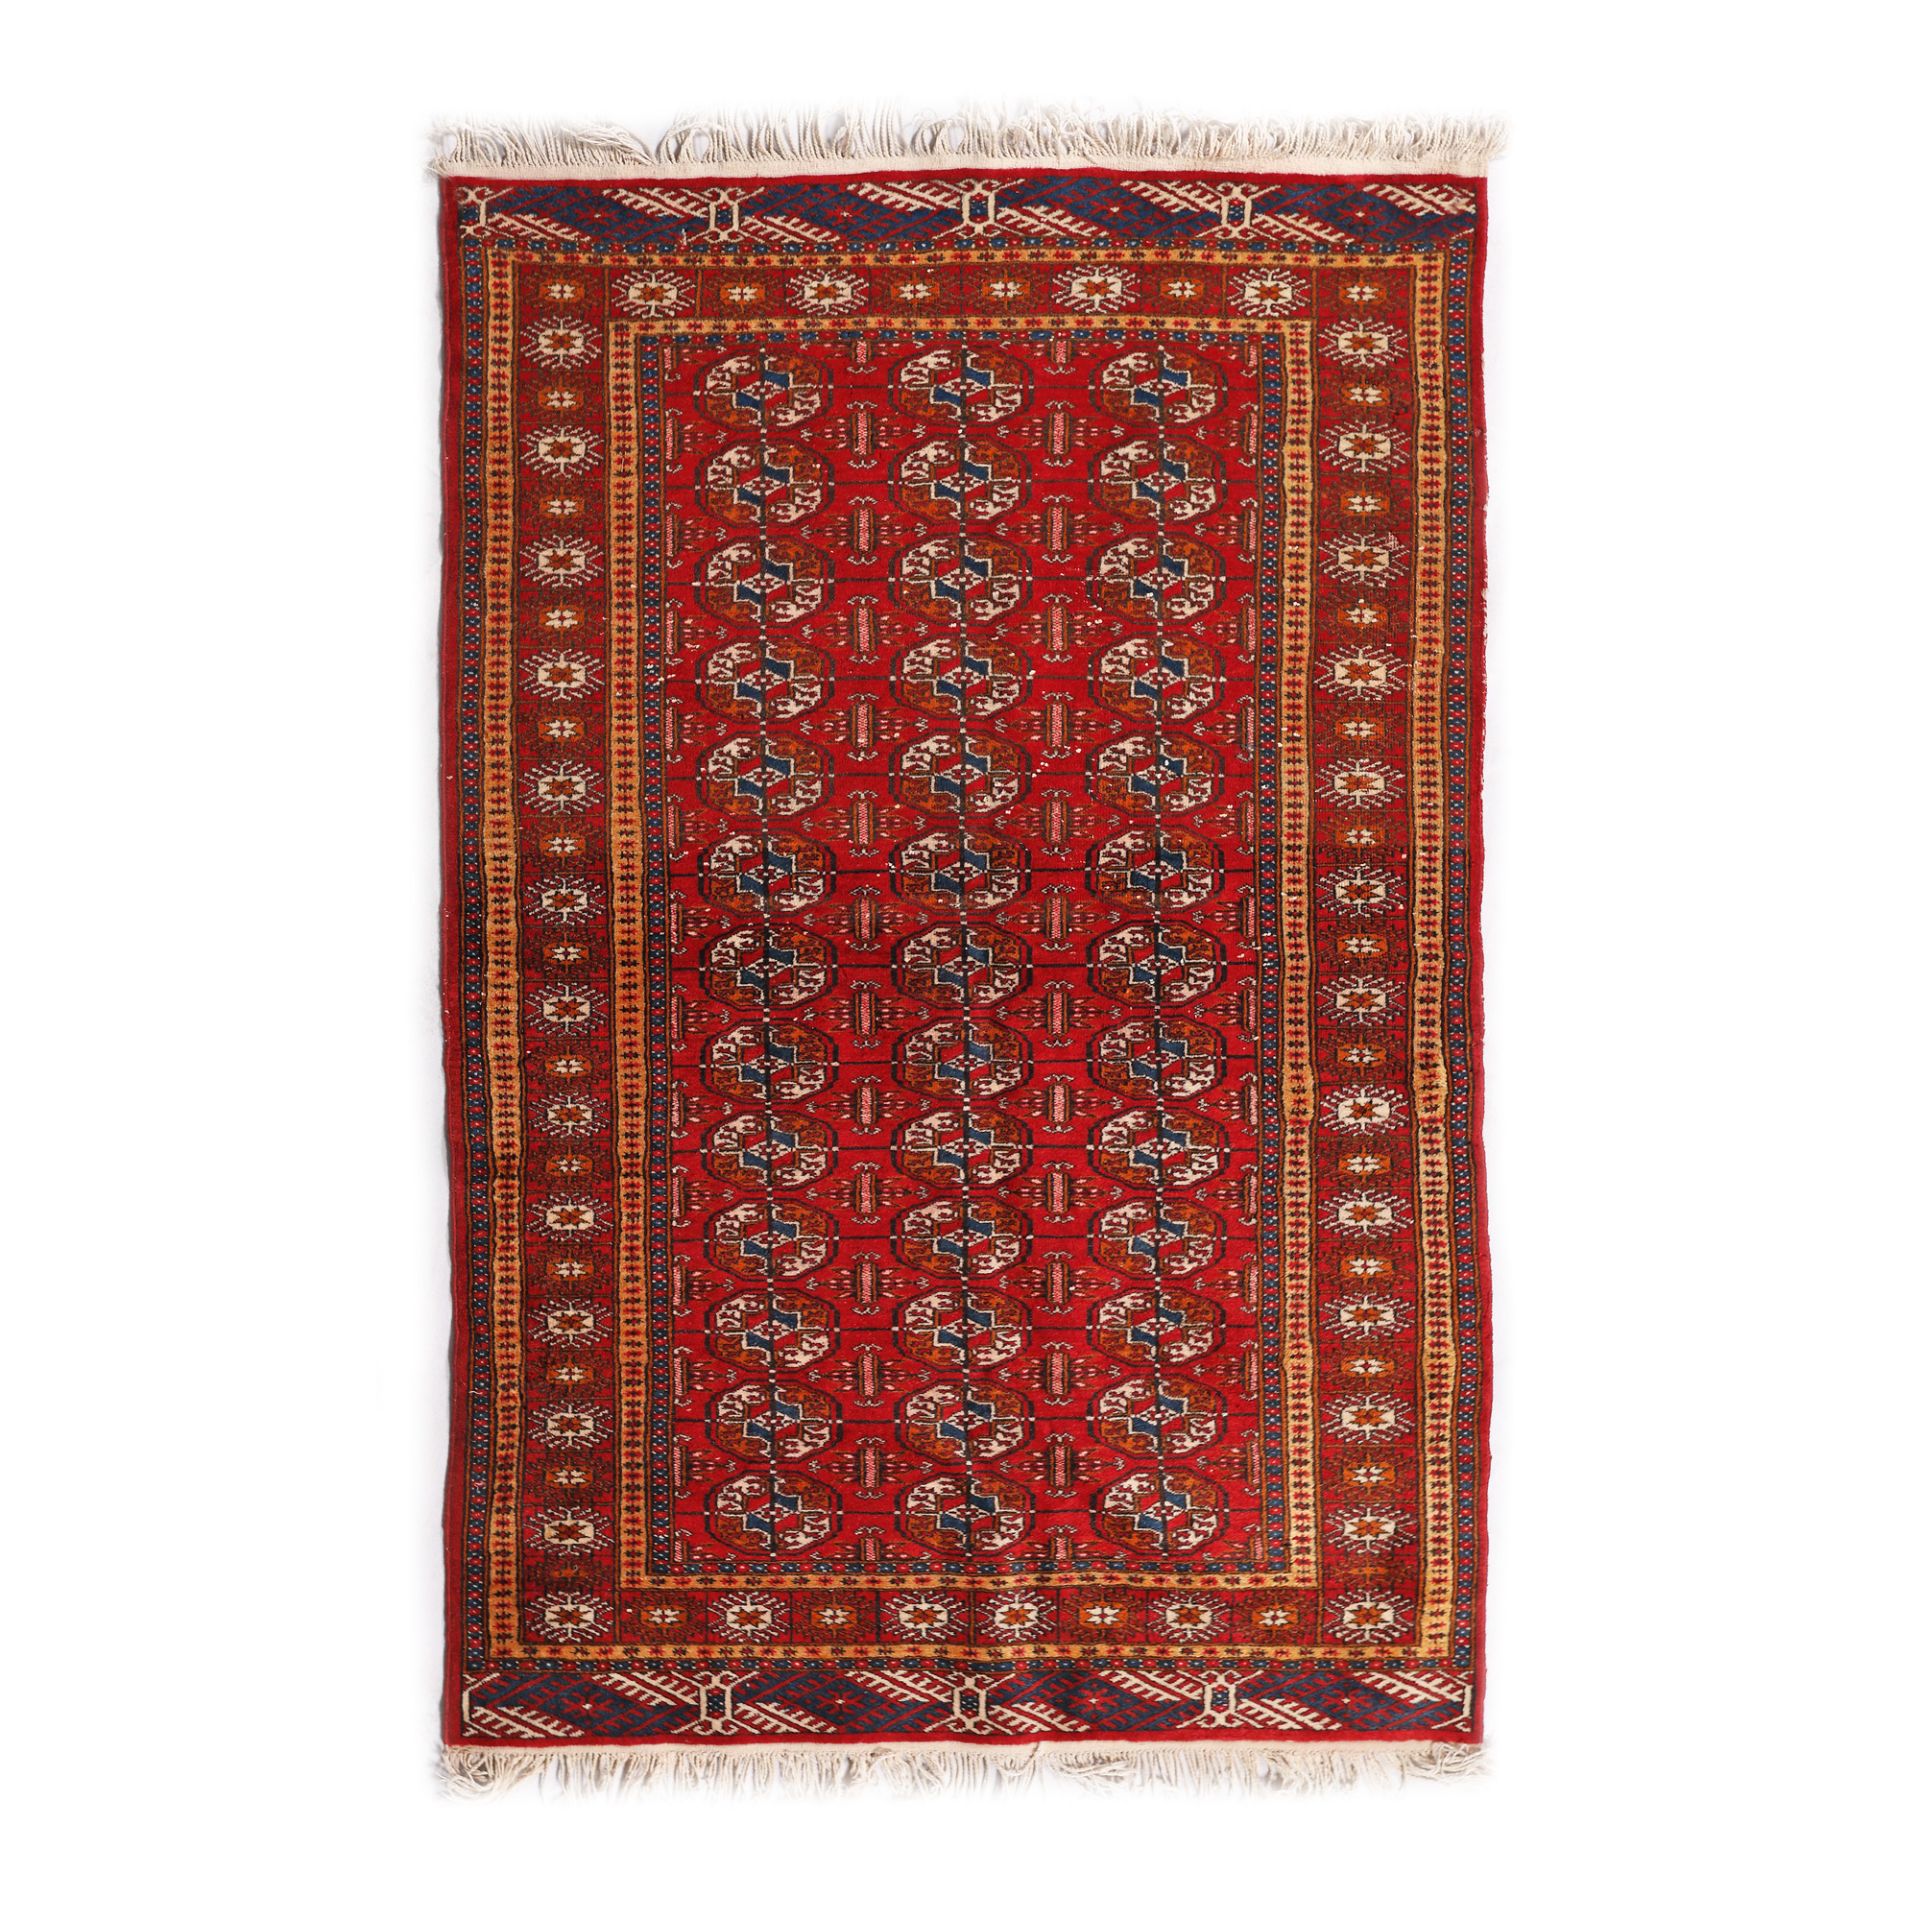 Tekke-Buhara rug, wool on wool warp, decorated with specific medallions, Turkmenistan, approx. 1950